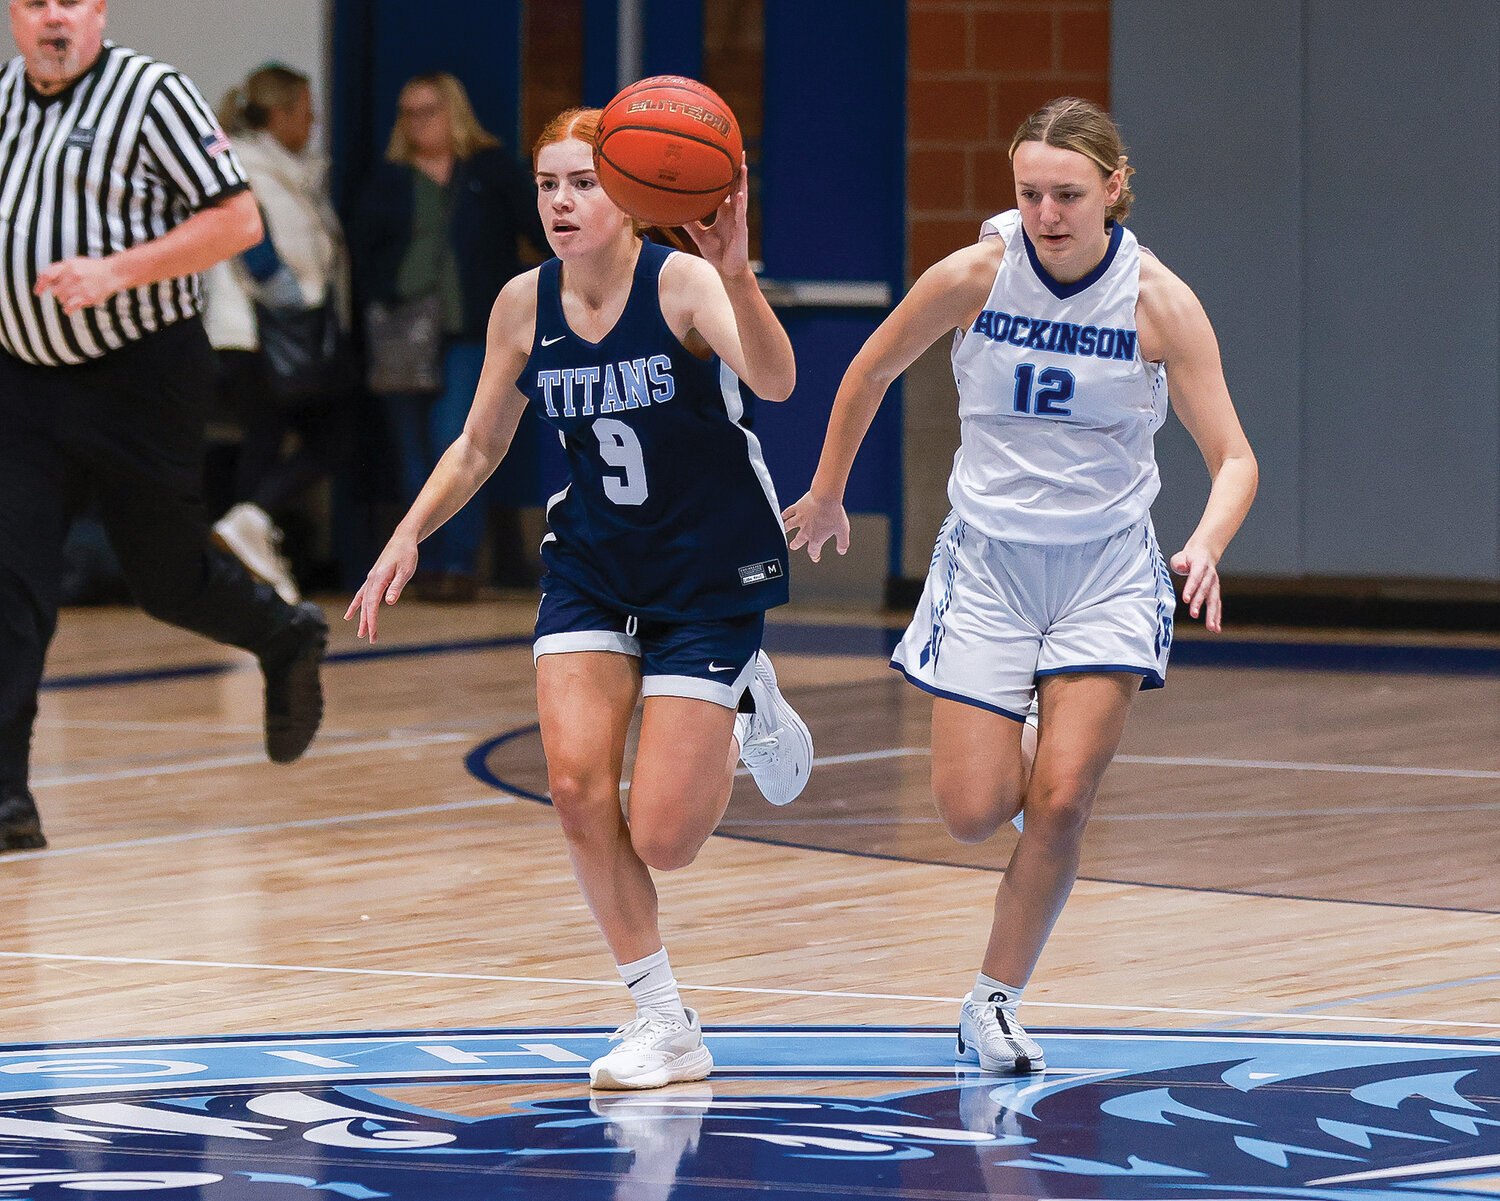 Tenison Woods’ Lillie Paul takes the ball upcourt with Hockinson’s Kathryn White defending during the exhibition match between the Hawks and the Tenison Woods Titans from Mount Gambier, Australia, on Thursday, Nov. 30.